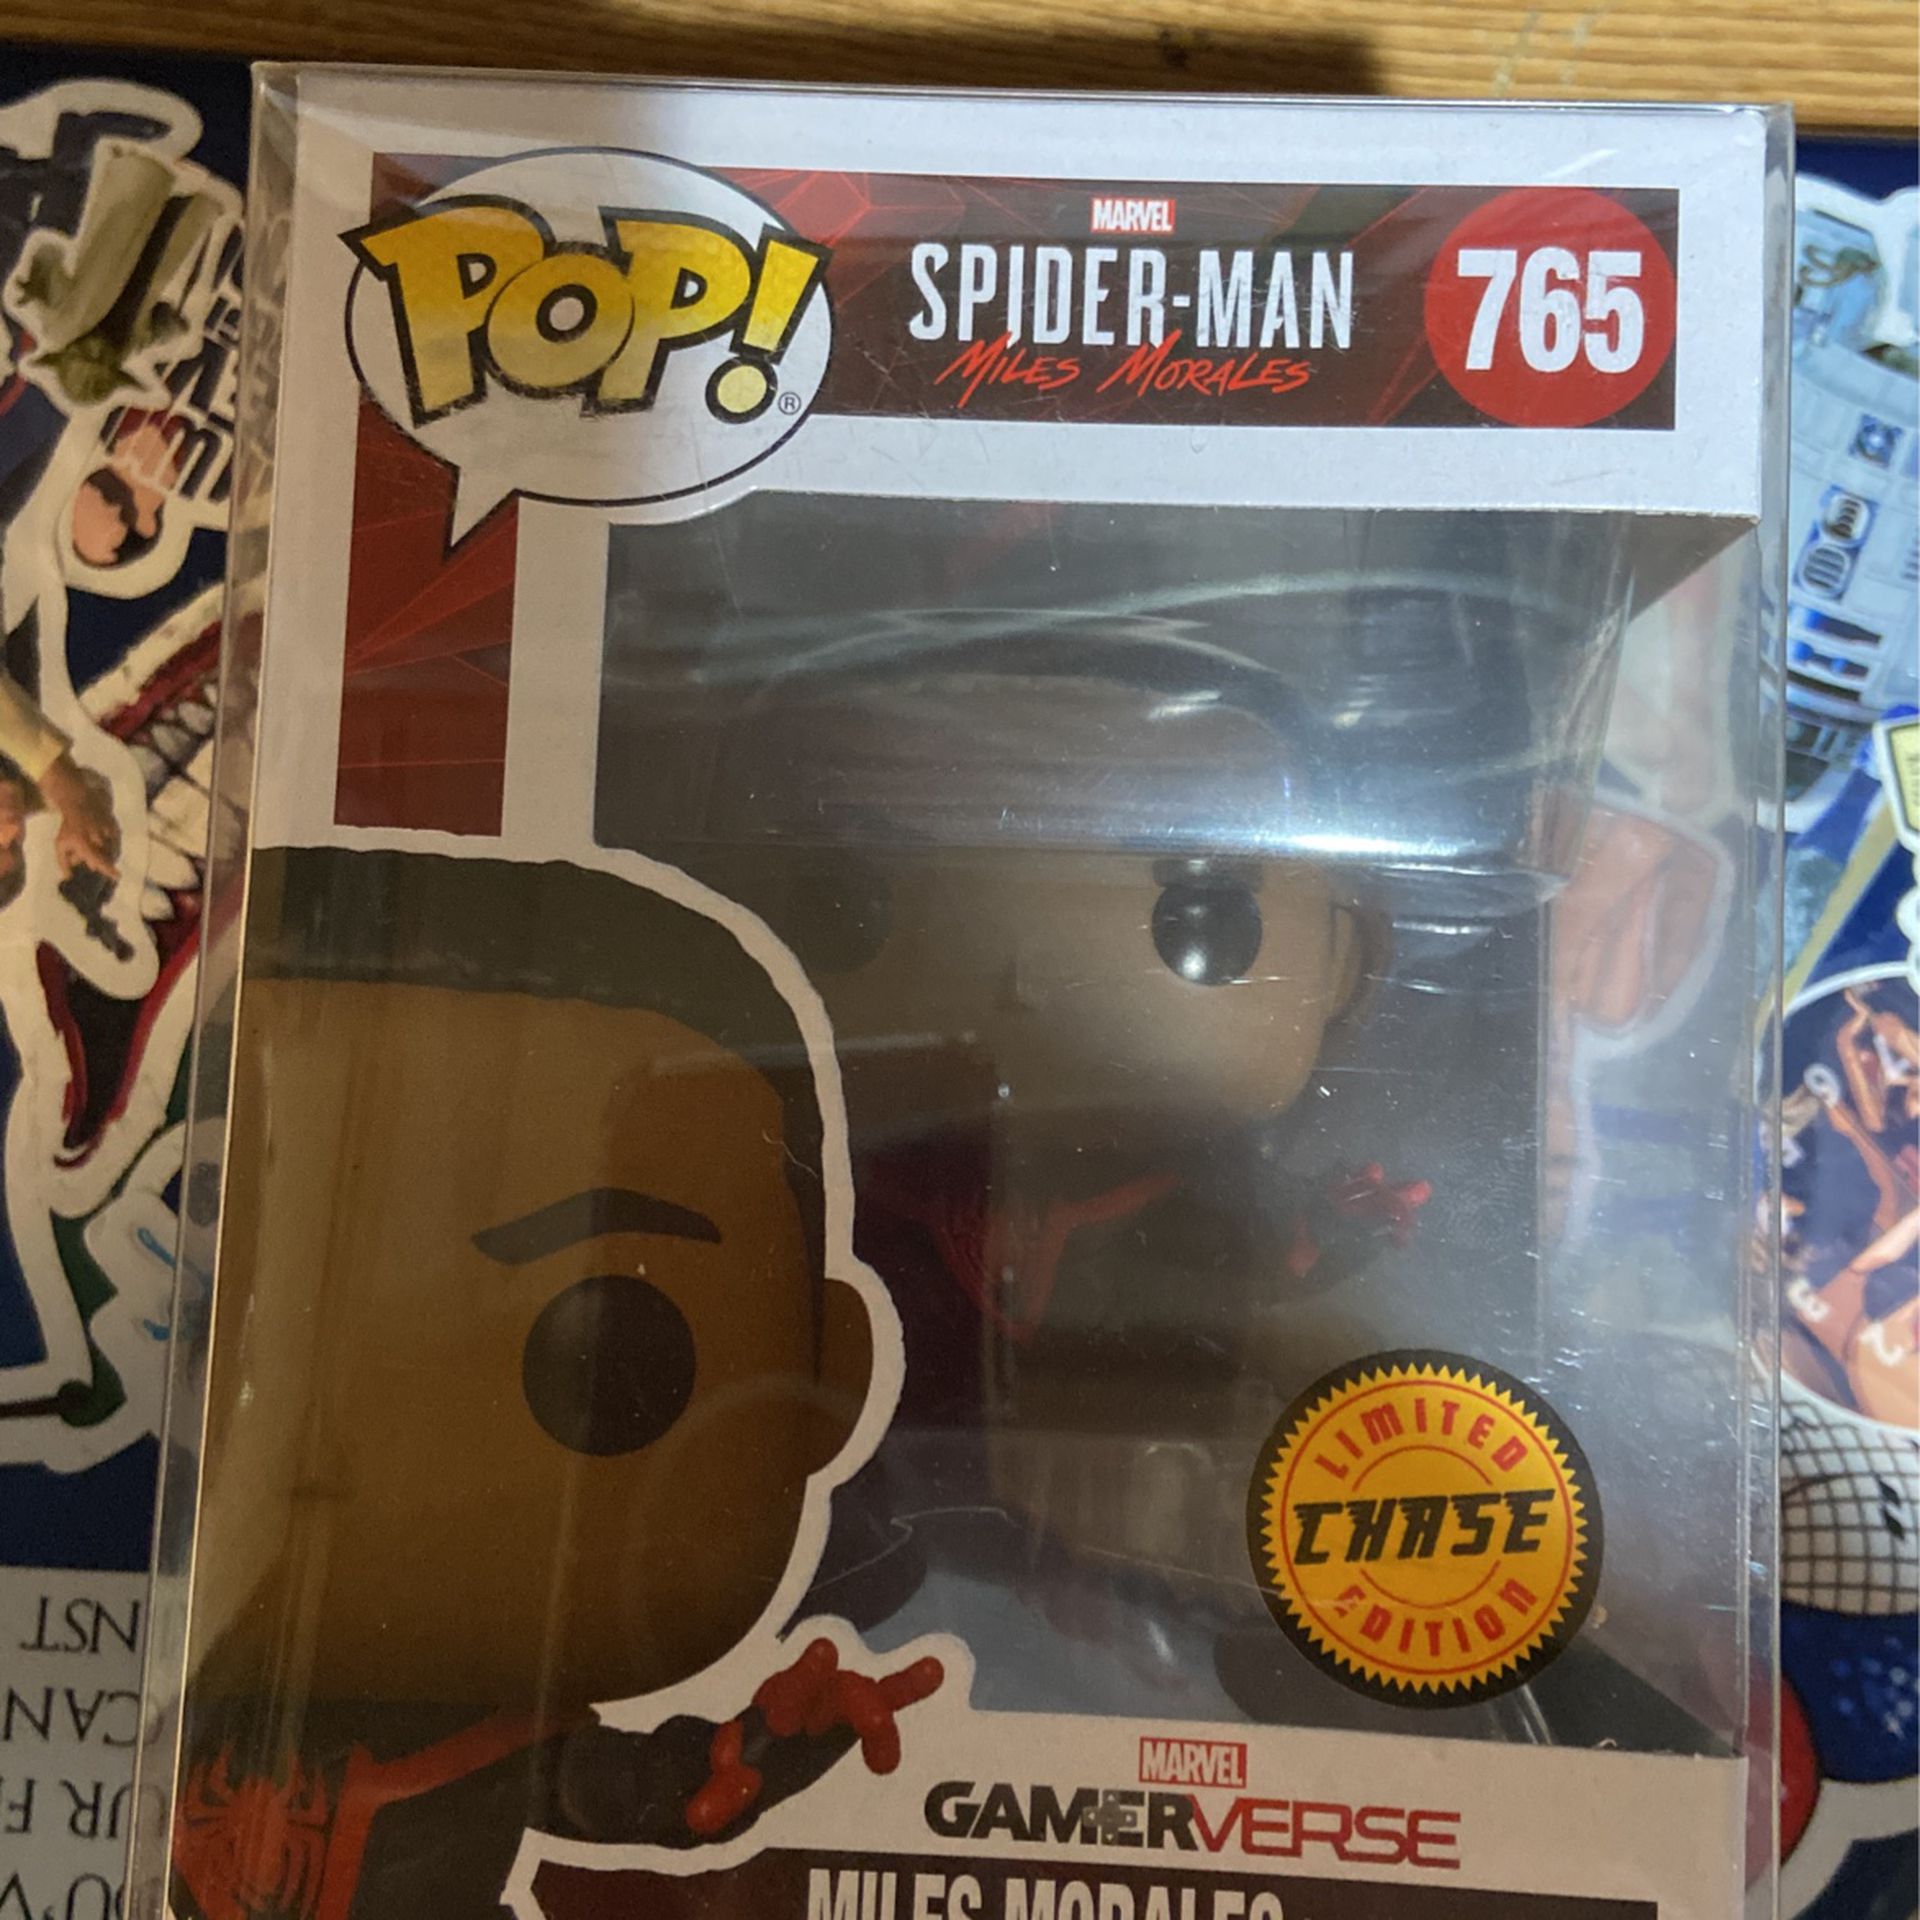 Spider-Man Miles Morales Limited Edition Chase Funko